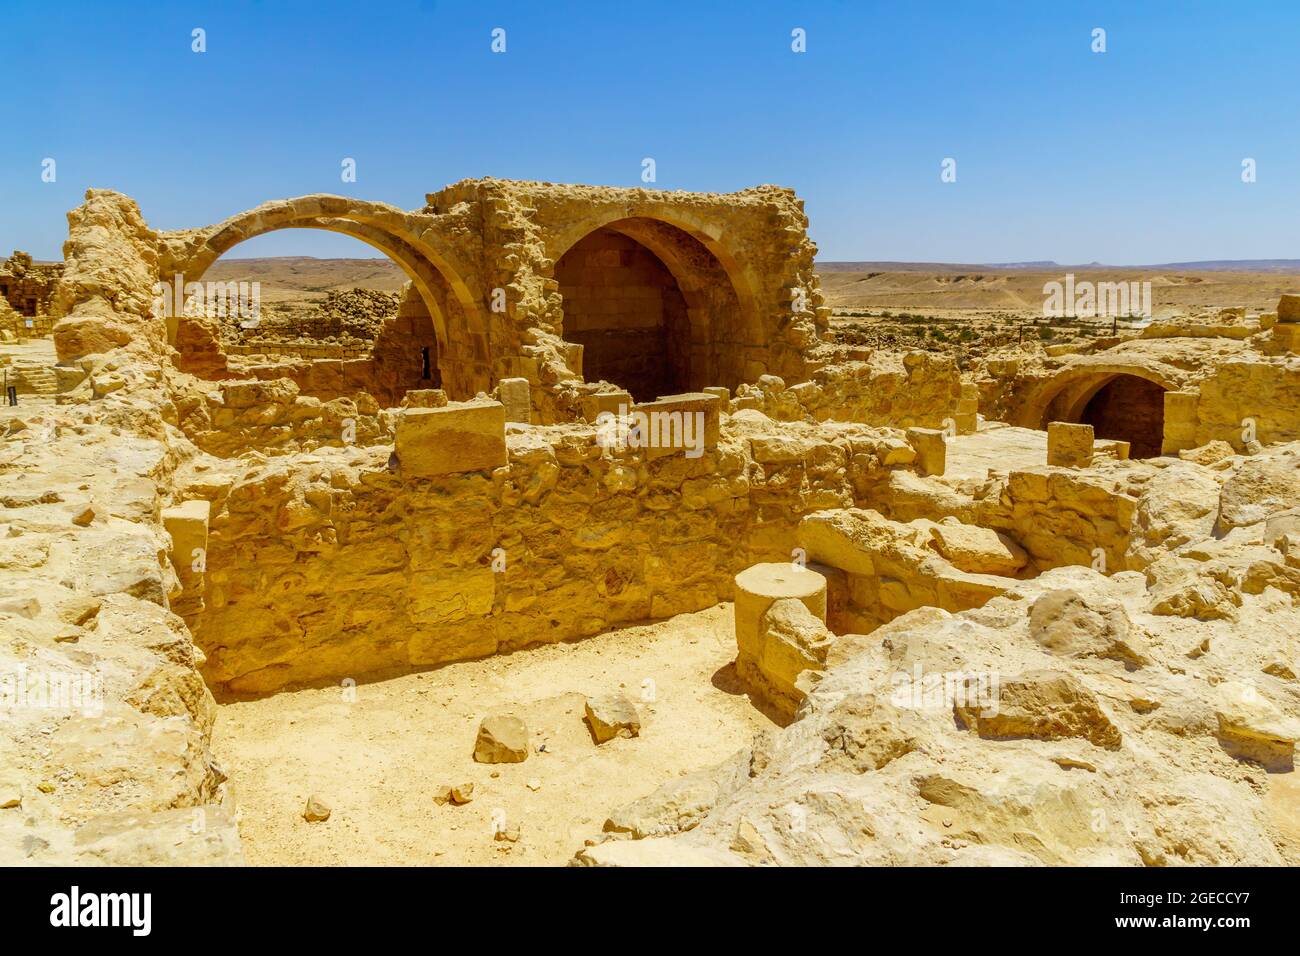 View of the ruined buildings in the ancient Nabataean city of Shivta, now a national Park, in the Negev Desert, Southern Israel Stock Photo